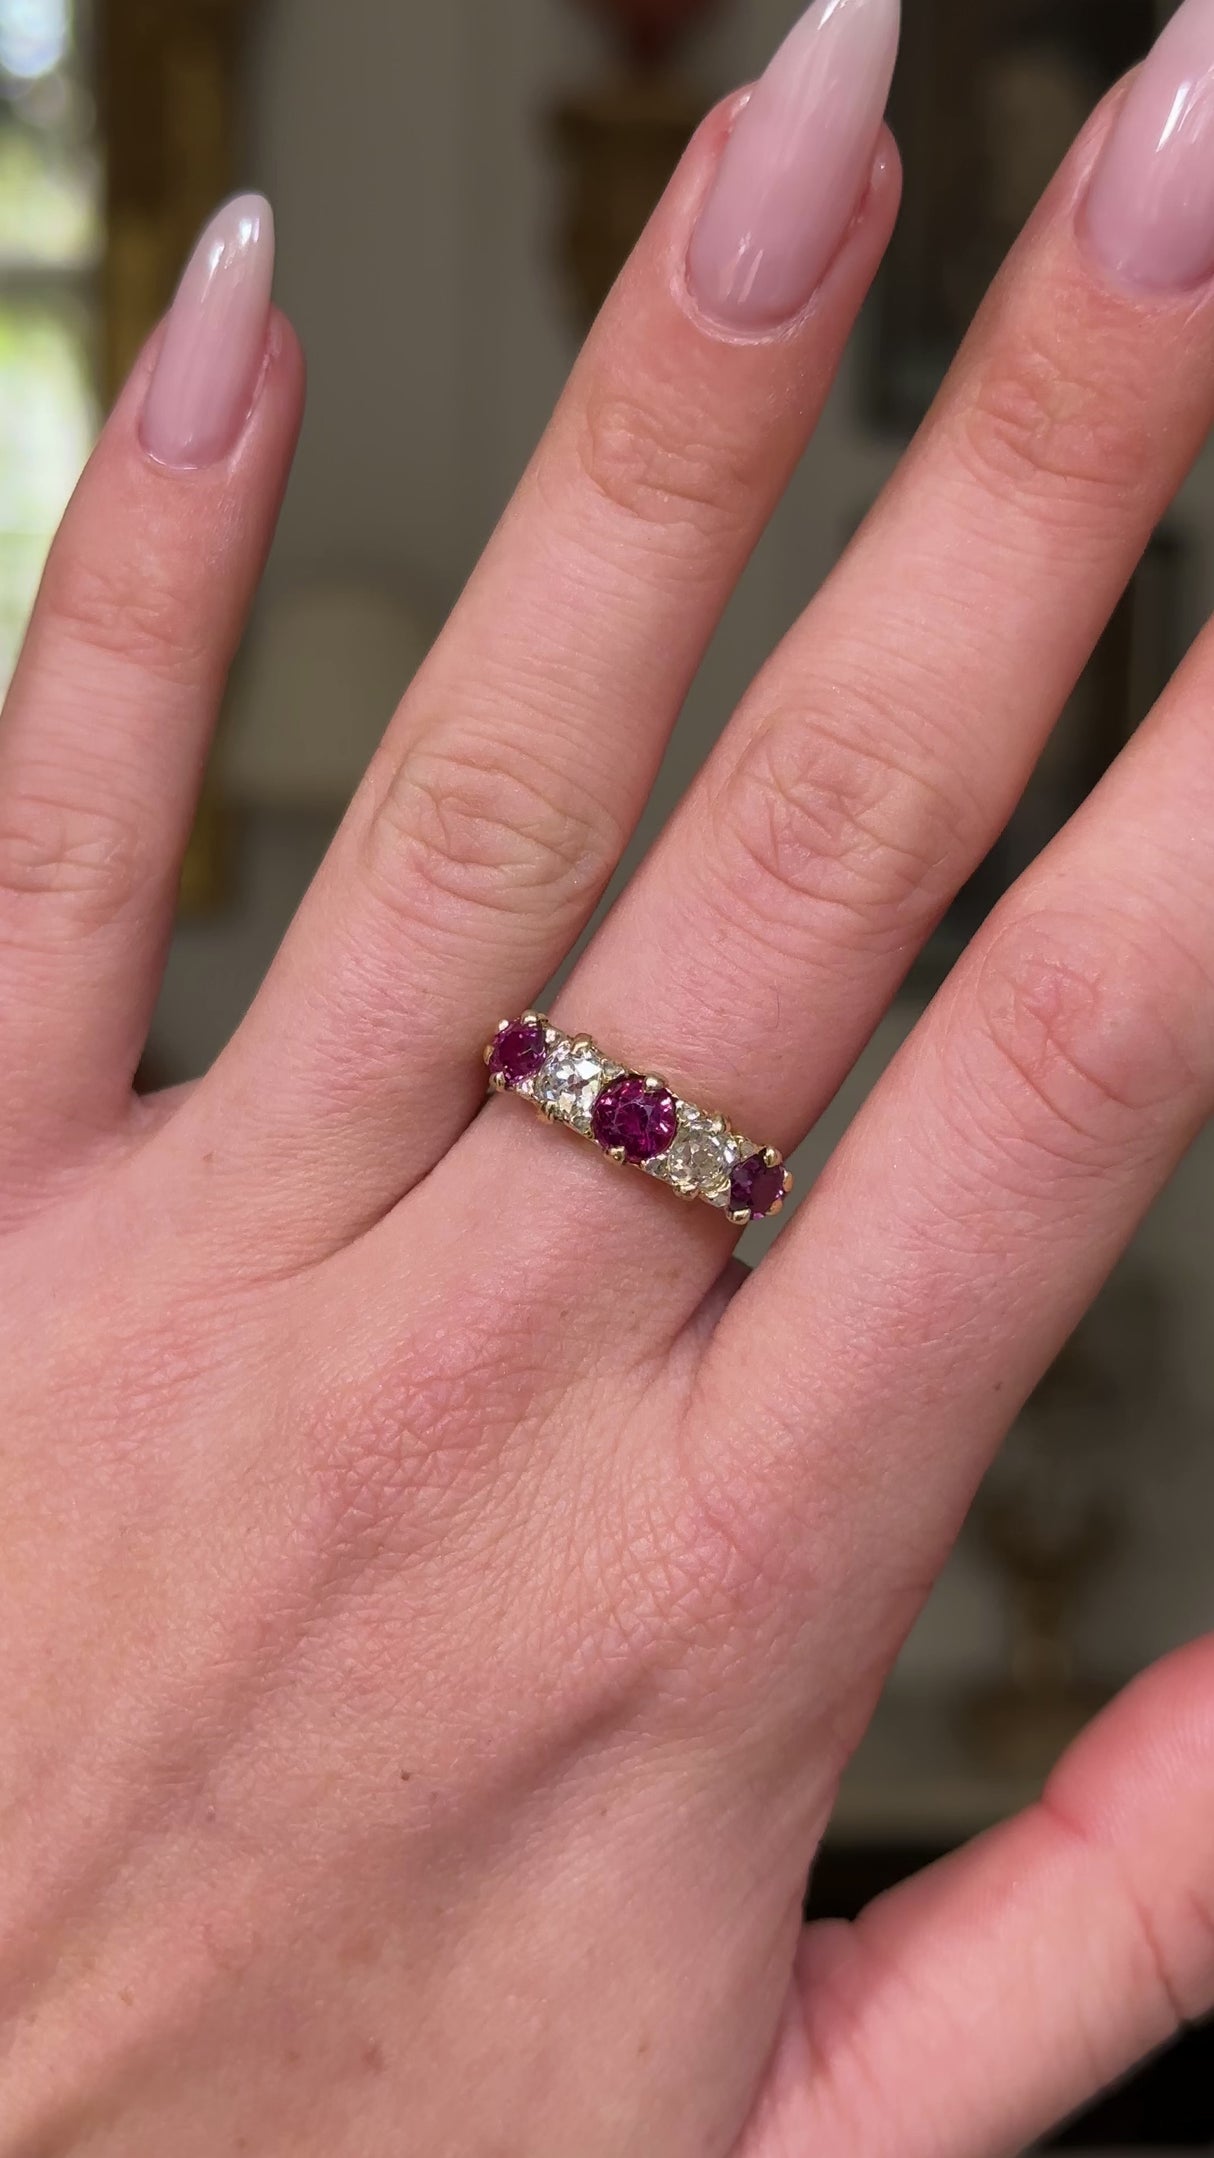 Antique, Edwardian five stone ruby and diamond ring, worn on hand and moved around to give perspective.